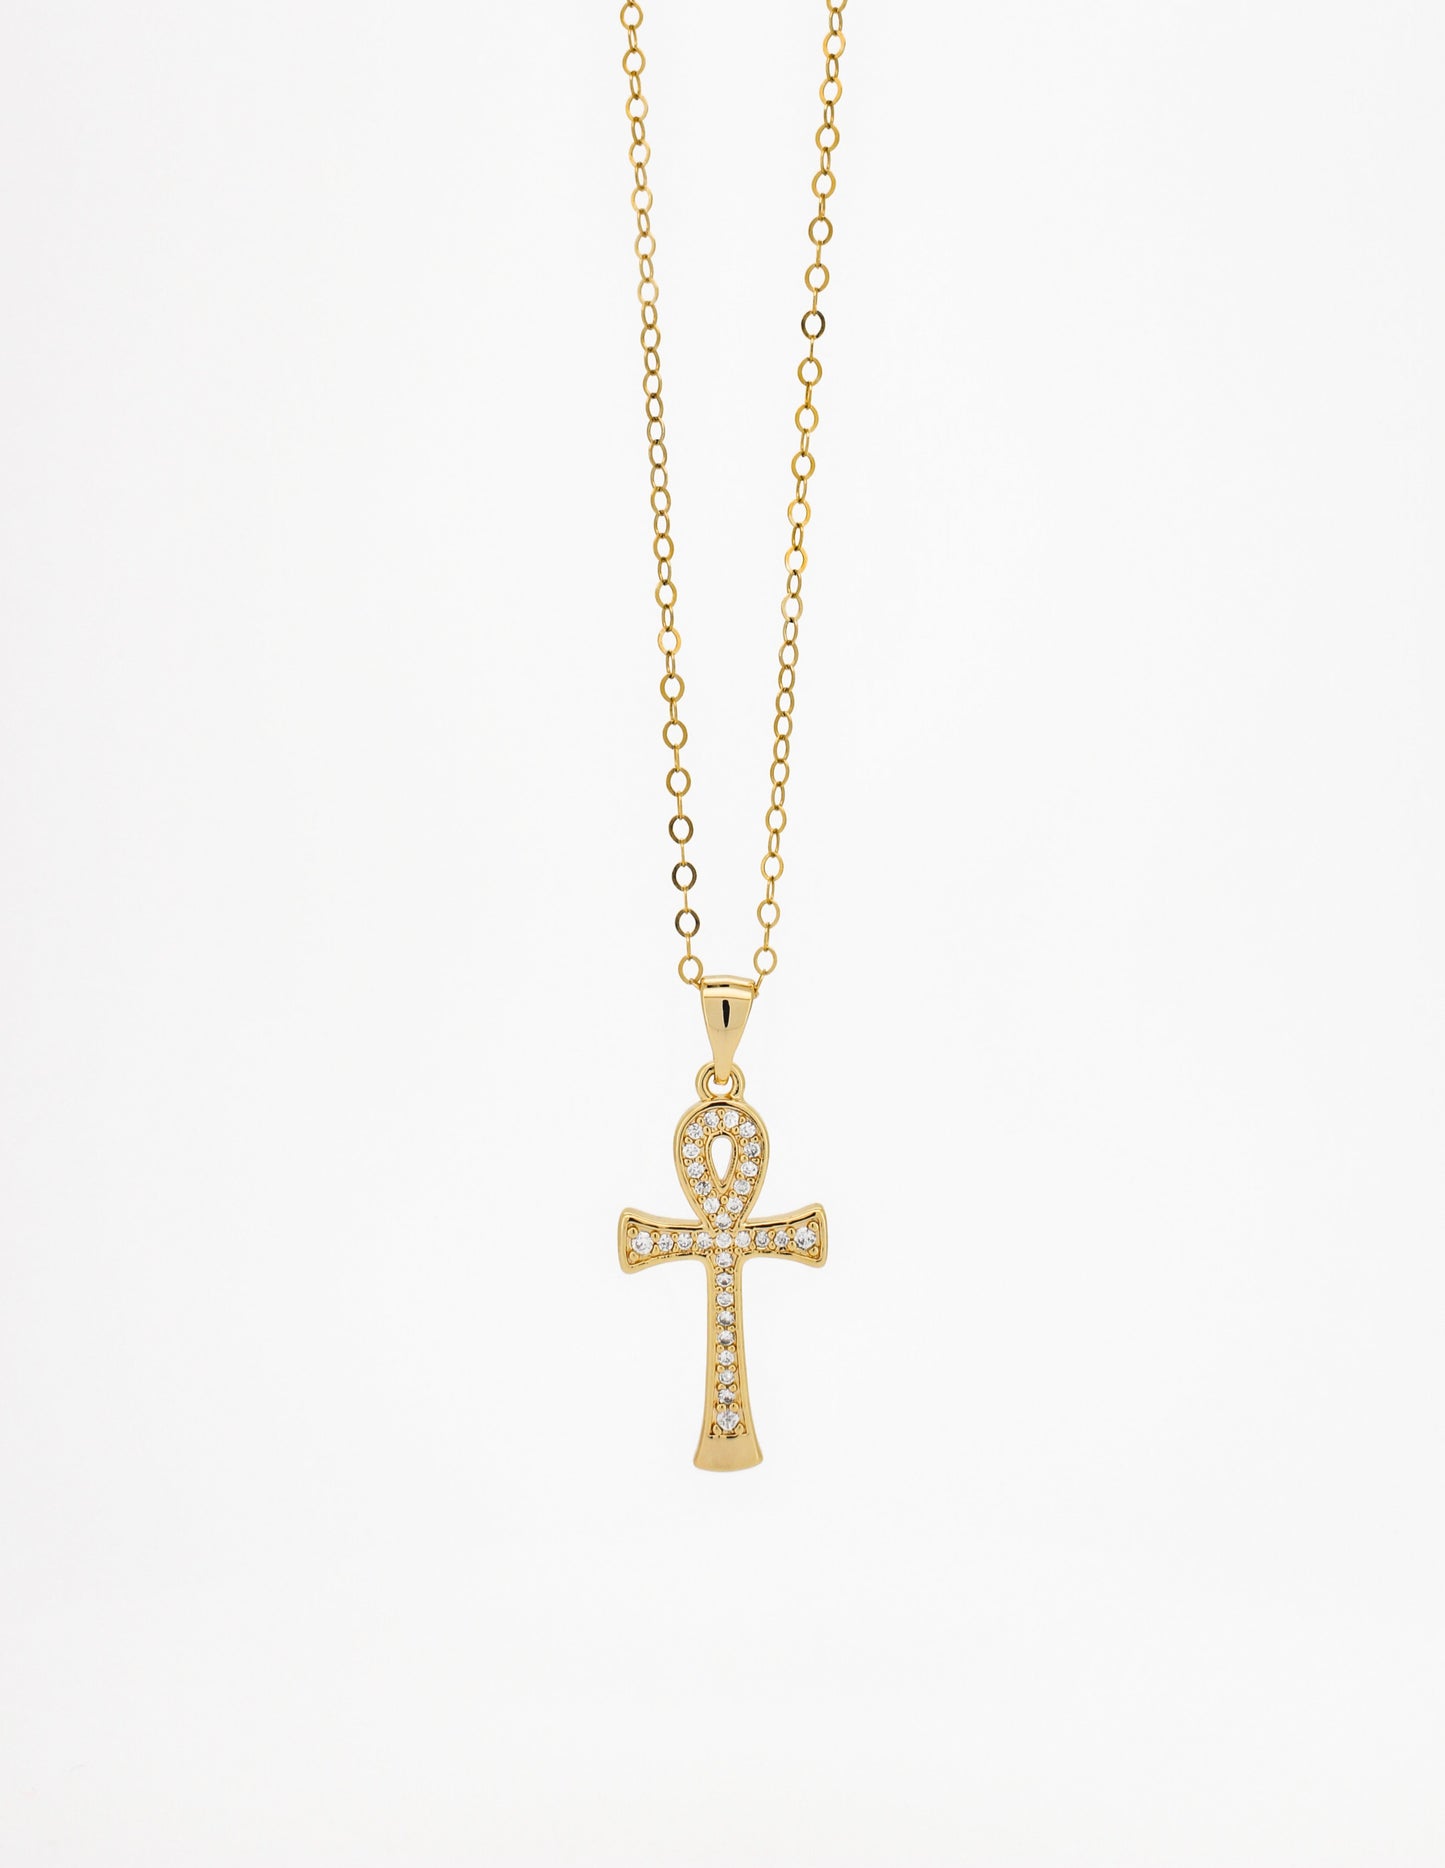 Ankh necklace ∙ Gold filled chain ∙ Paved charm cross zircon ∙ Ansated cross pantheon egypt ∙ 14x29mm